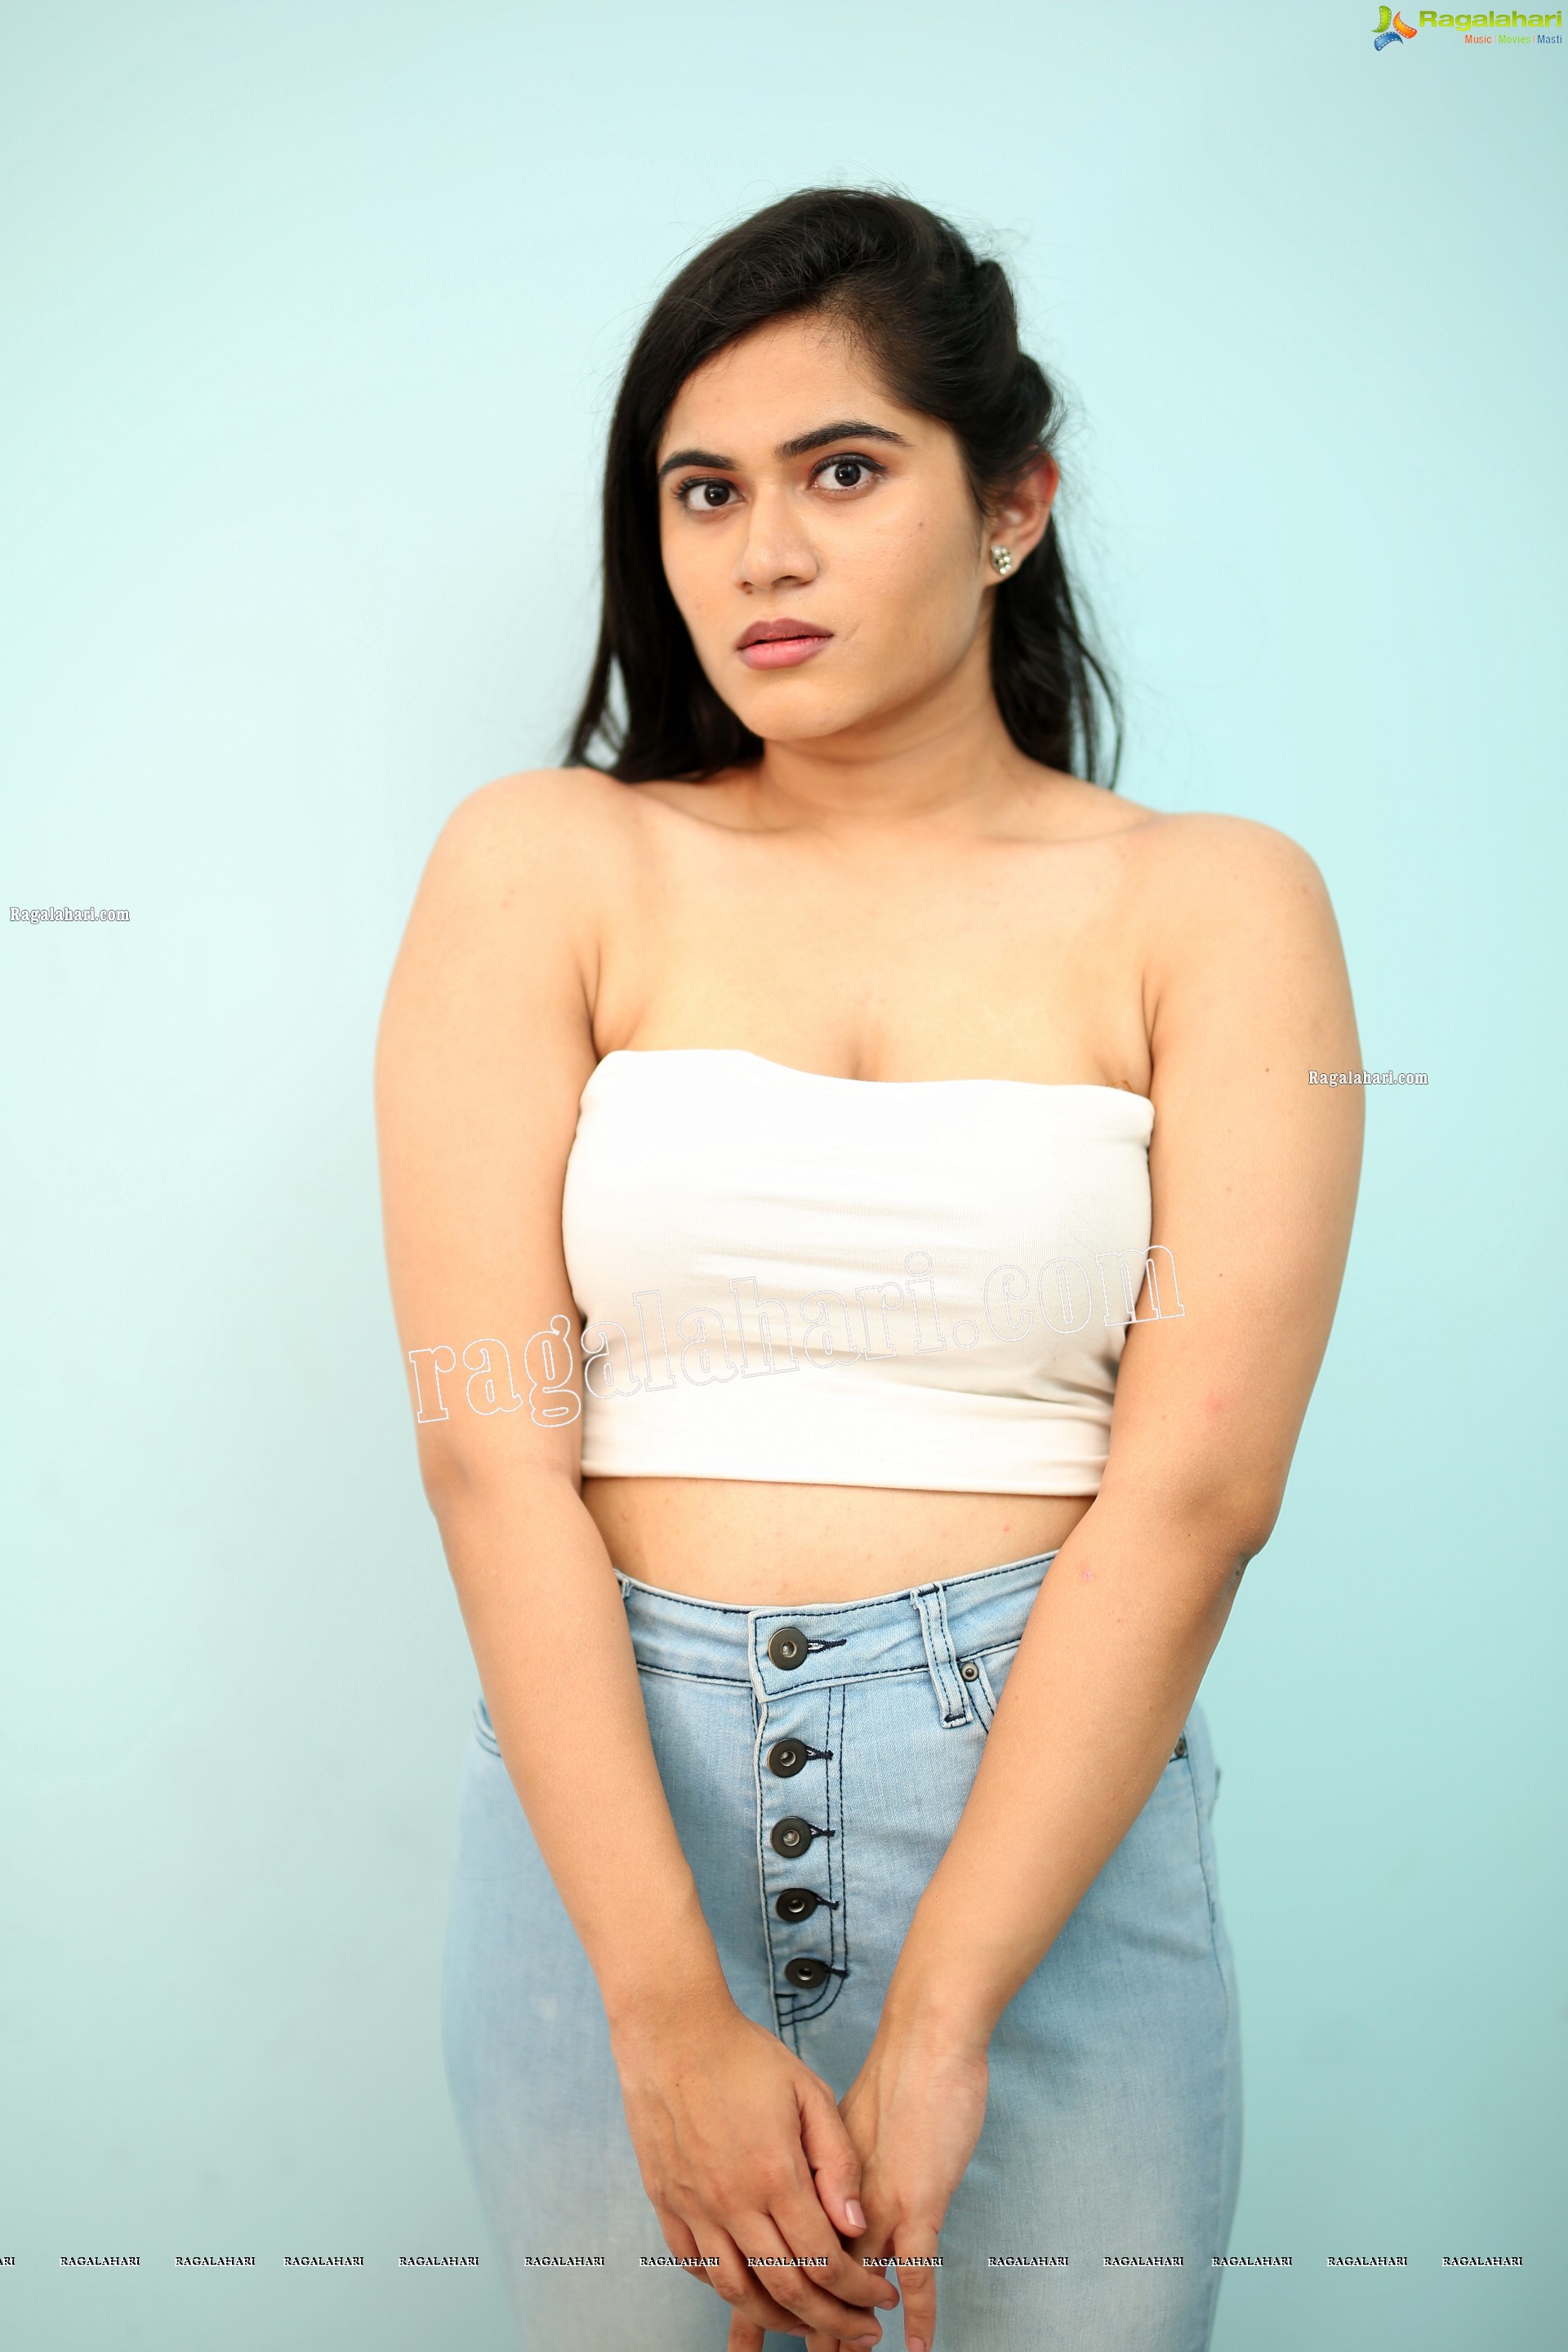 Tara Chowdary in White Spaghetti Strap Crop Top and Jeans, Exclusive Photo Shoot